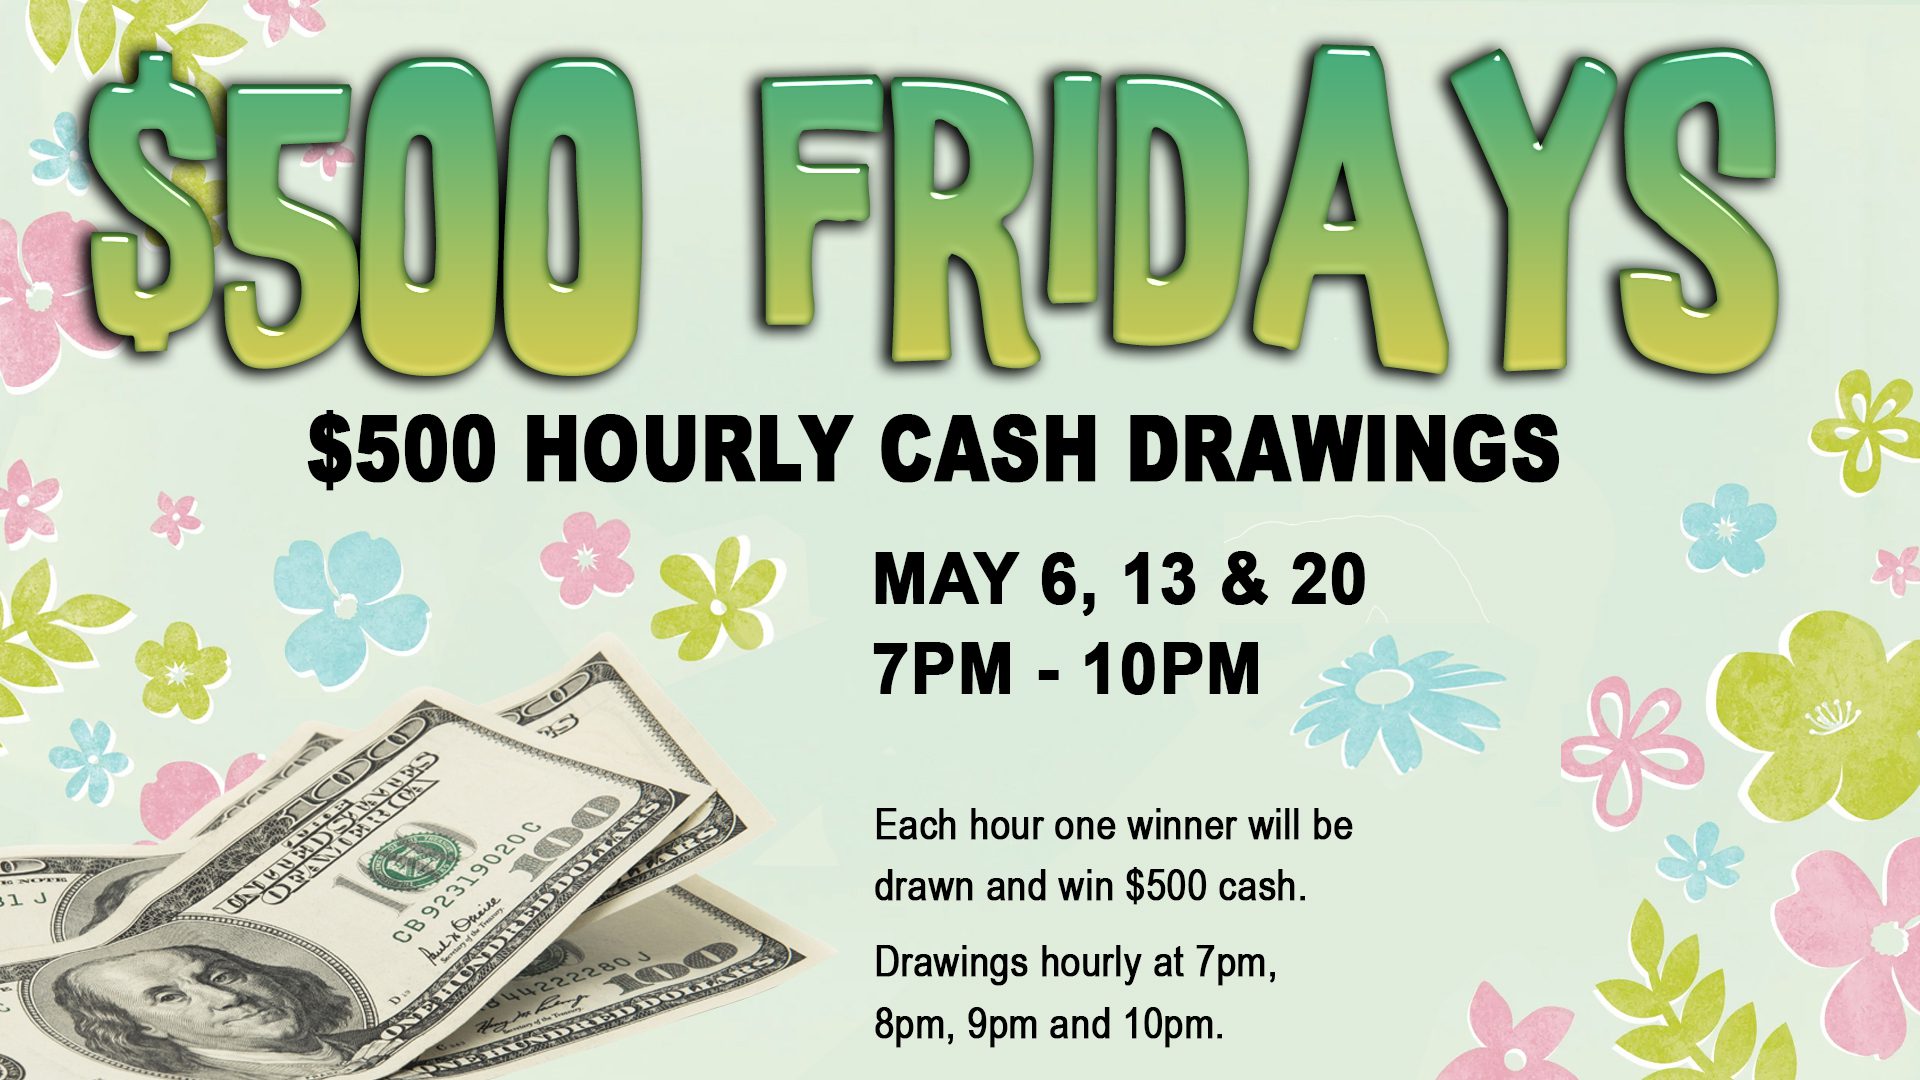 Promotional poster for "$500 fridays" featuring hourly cash drawings with dates and times.